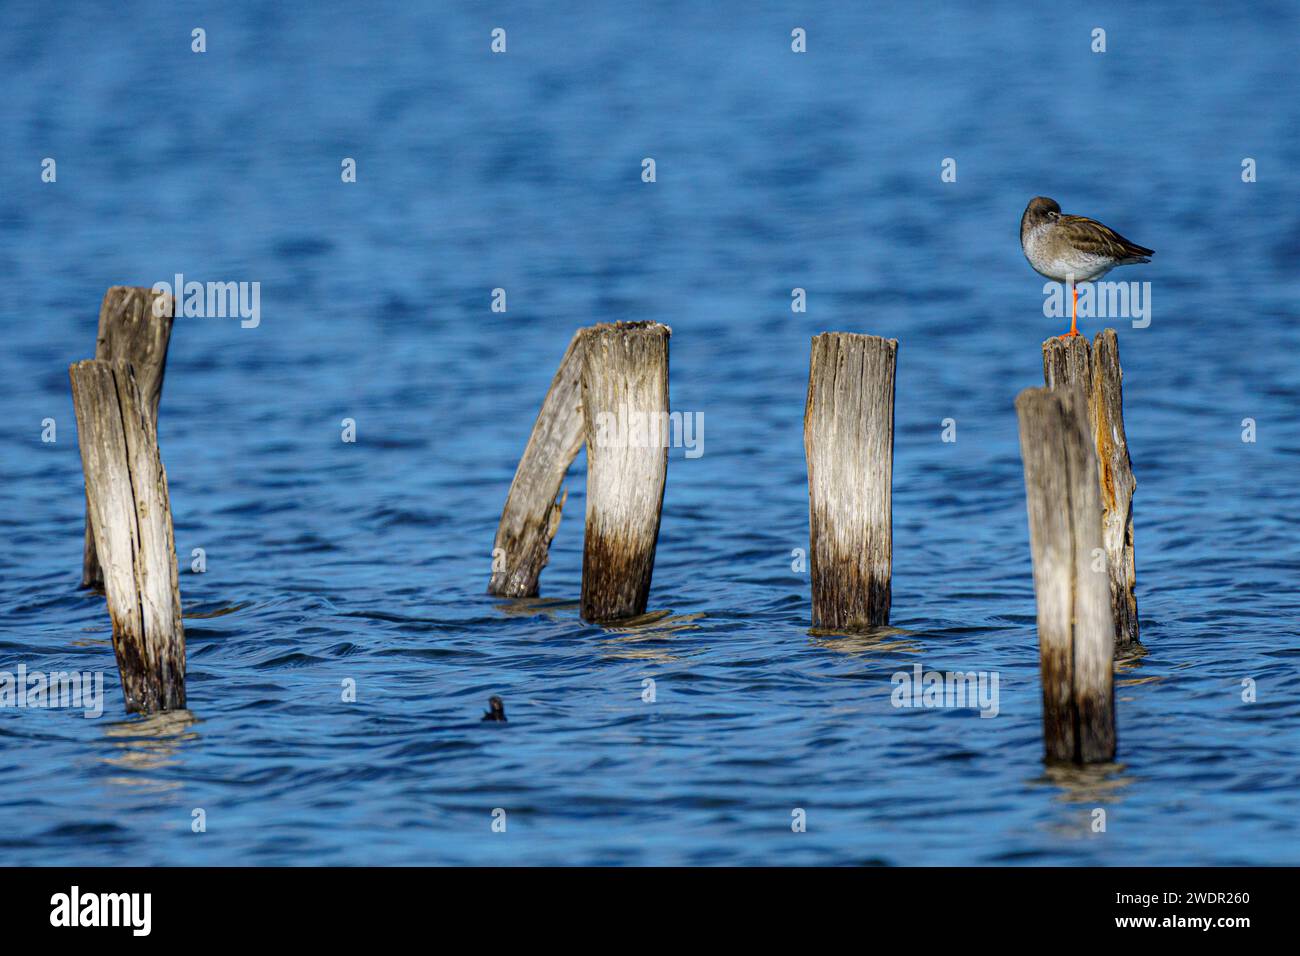 A Dunlin bird (Calidris alpina) perched on the logs amidst calm waters Stock Photo